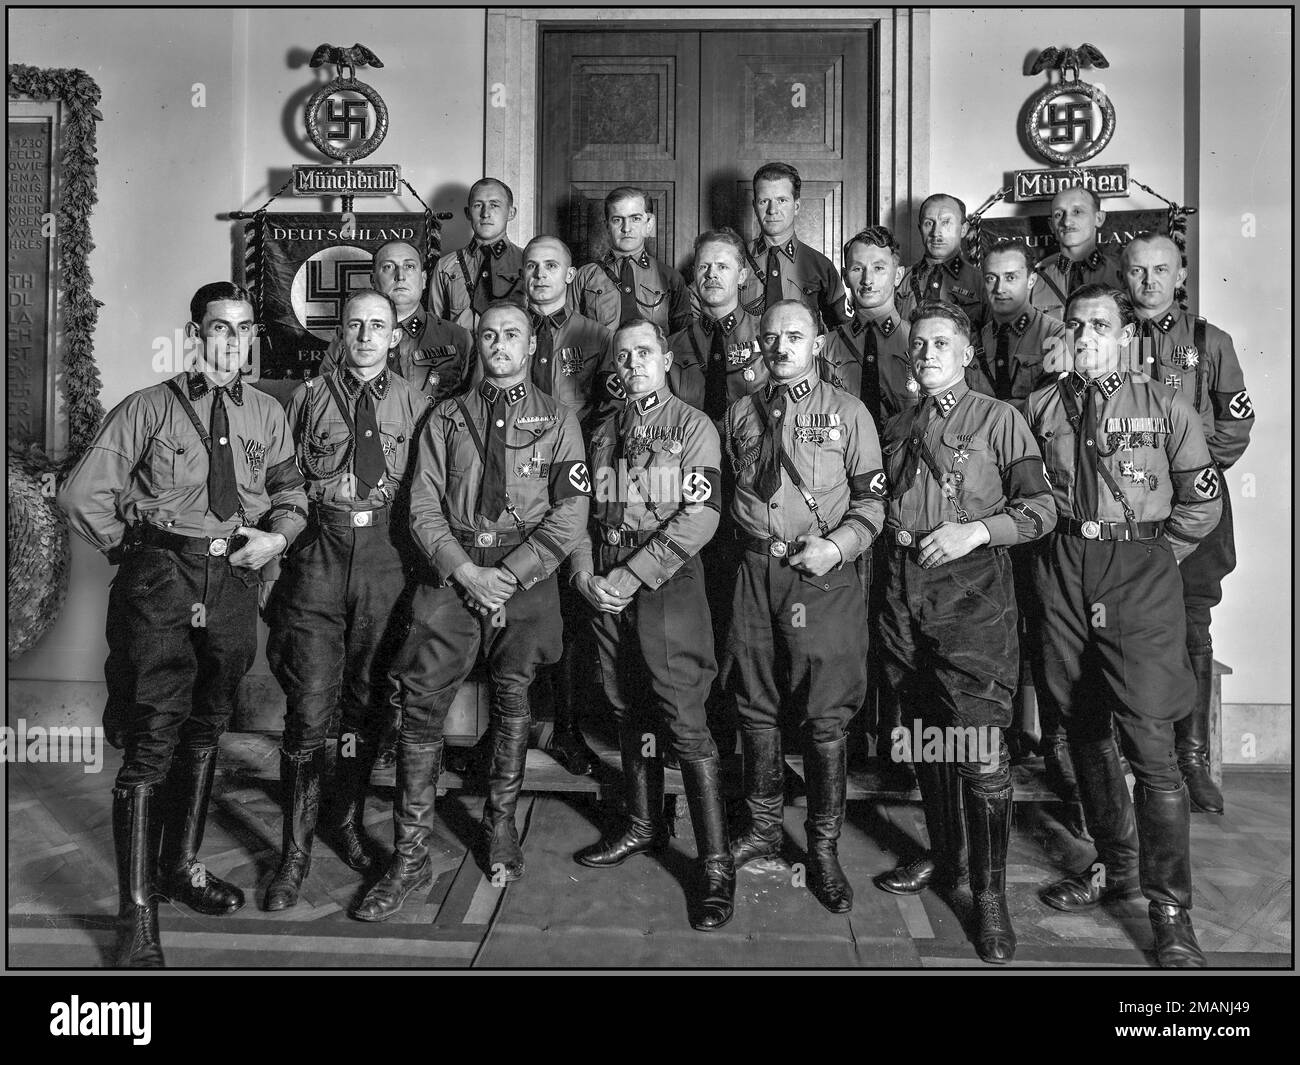 Nazi Propaganda group photo of uniformed leaders (German: SS Führer) of the SS Regiment Die Schutzstaffel der NSDAP (SS) Munich, in front of the Senatorensaal (Senators' Hall, conference/council room) by the Ehrentafeln/Heldentafeln, honour plaques/heroes tables of the Blutzeuge, the November 9th 1923 Putsch Nazi martyrs, in the lobby of the Brown House in Munich, Germany, ca. 1931–1932. The 1st SS-Standarte was a regimental command of the Allgemeine-SS and one of the units in the General-SS order of battle. Based in Munich, the 1st SS Standarte was charged with protection of top Nazi leaders Stock Photo